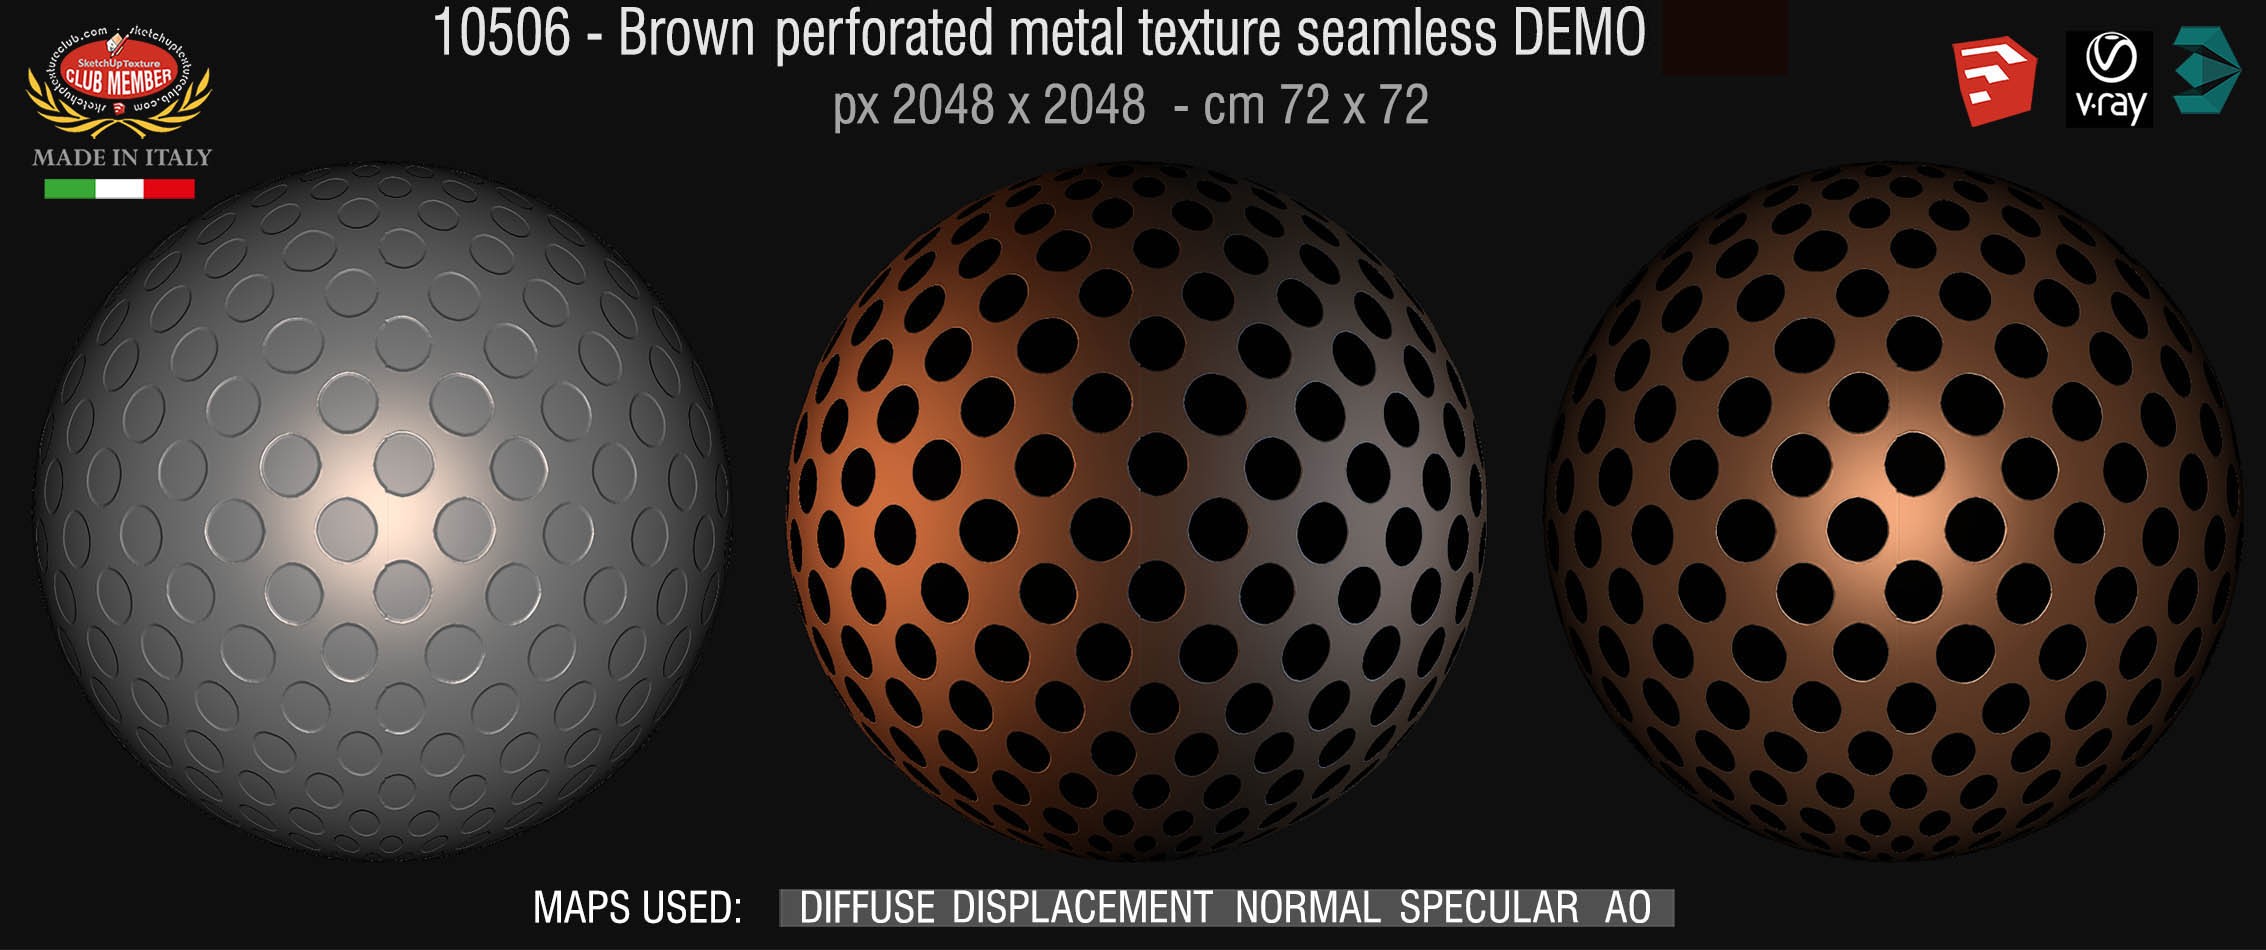 10506 HR Brown perforated metal texture seamless + maps DEMO